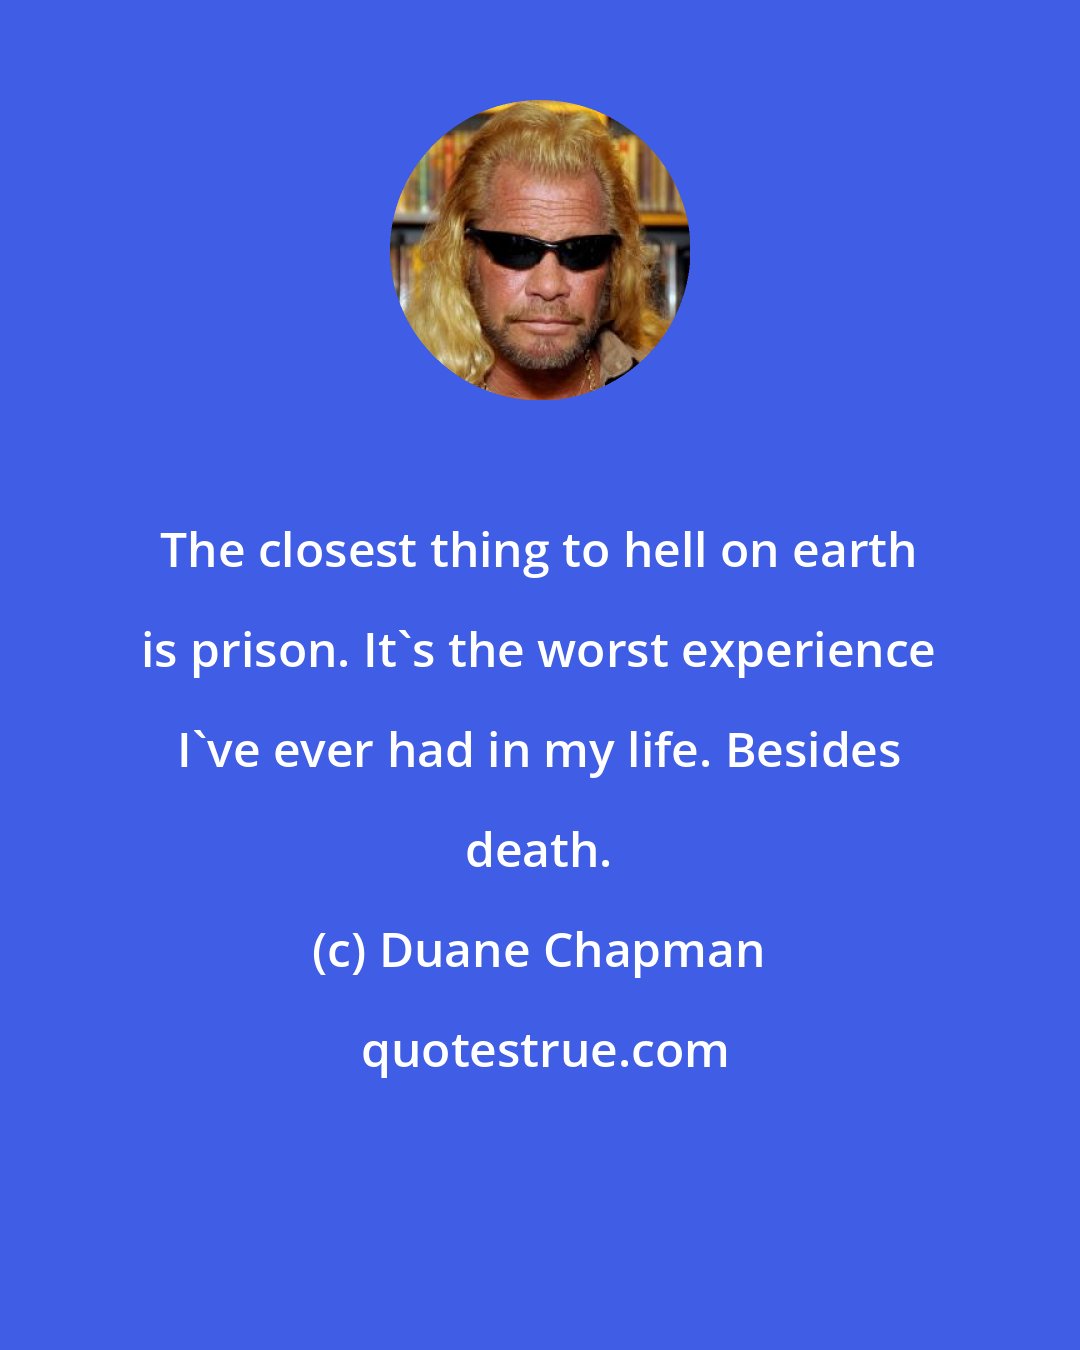 Duane Chapman: The closest thing to hell on earth is prison. It's the worst experience I've ever had in my life. Besides death.